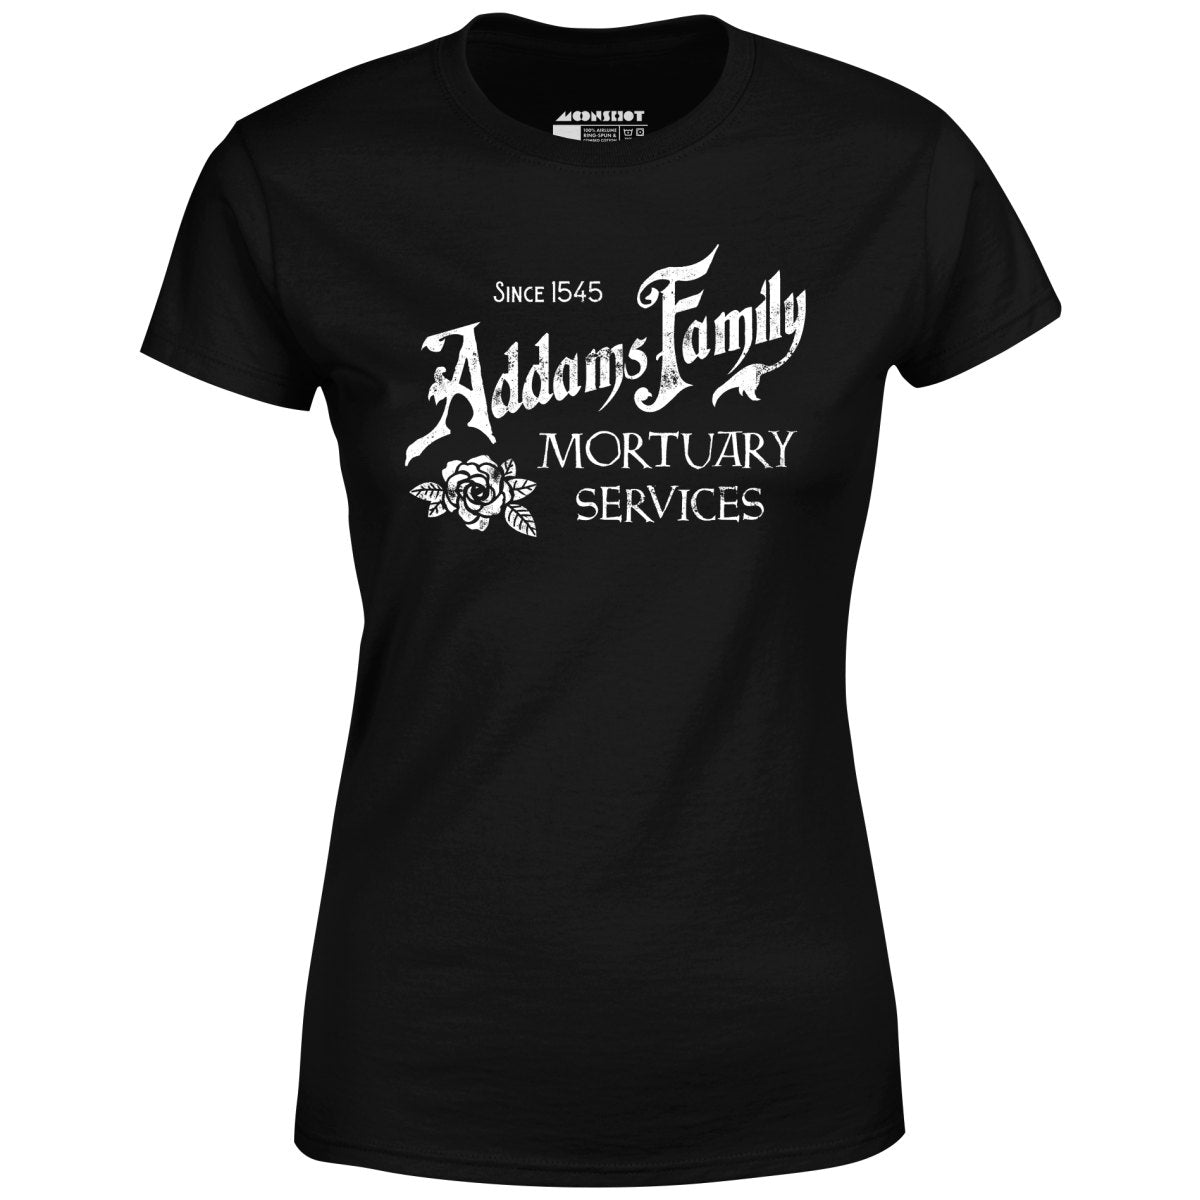 Addams Family Mortuary Services - Women's T-Shirt